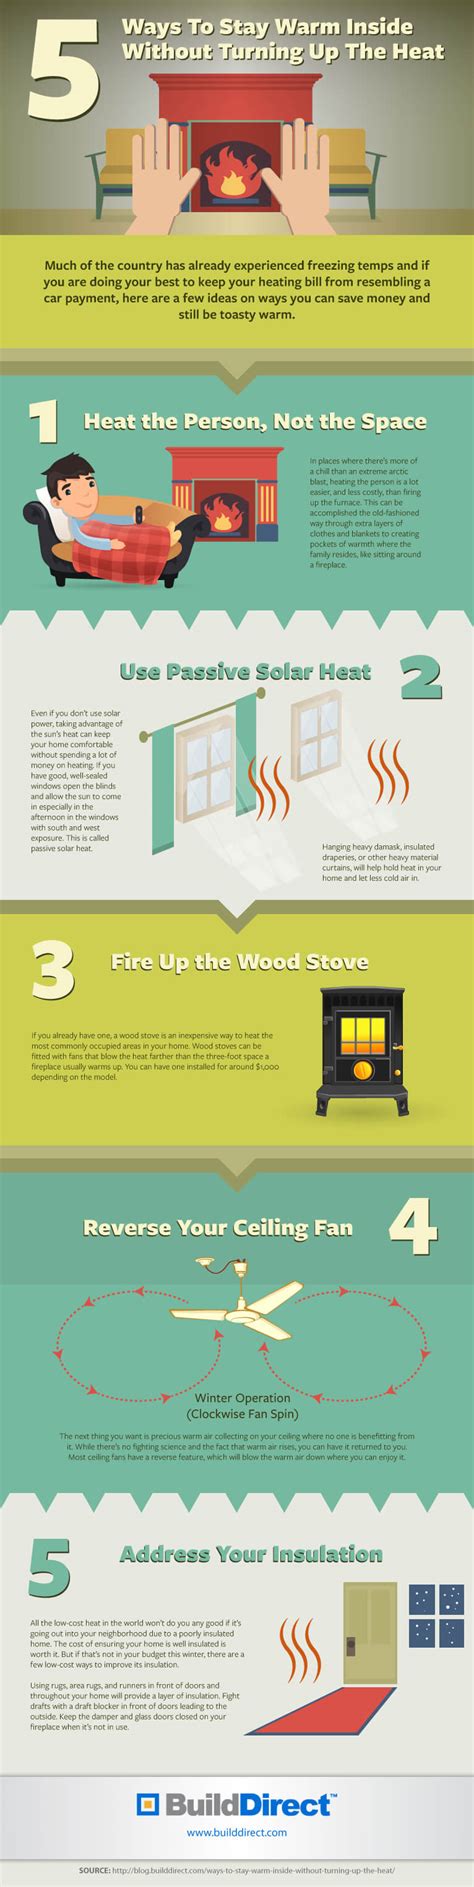 5 Ways To Stay Warm Without Turning Up The Heat An Infographic